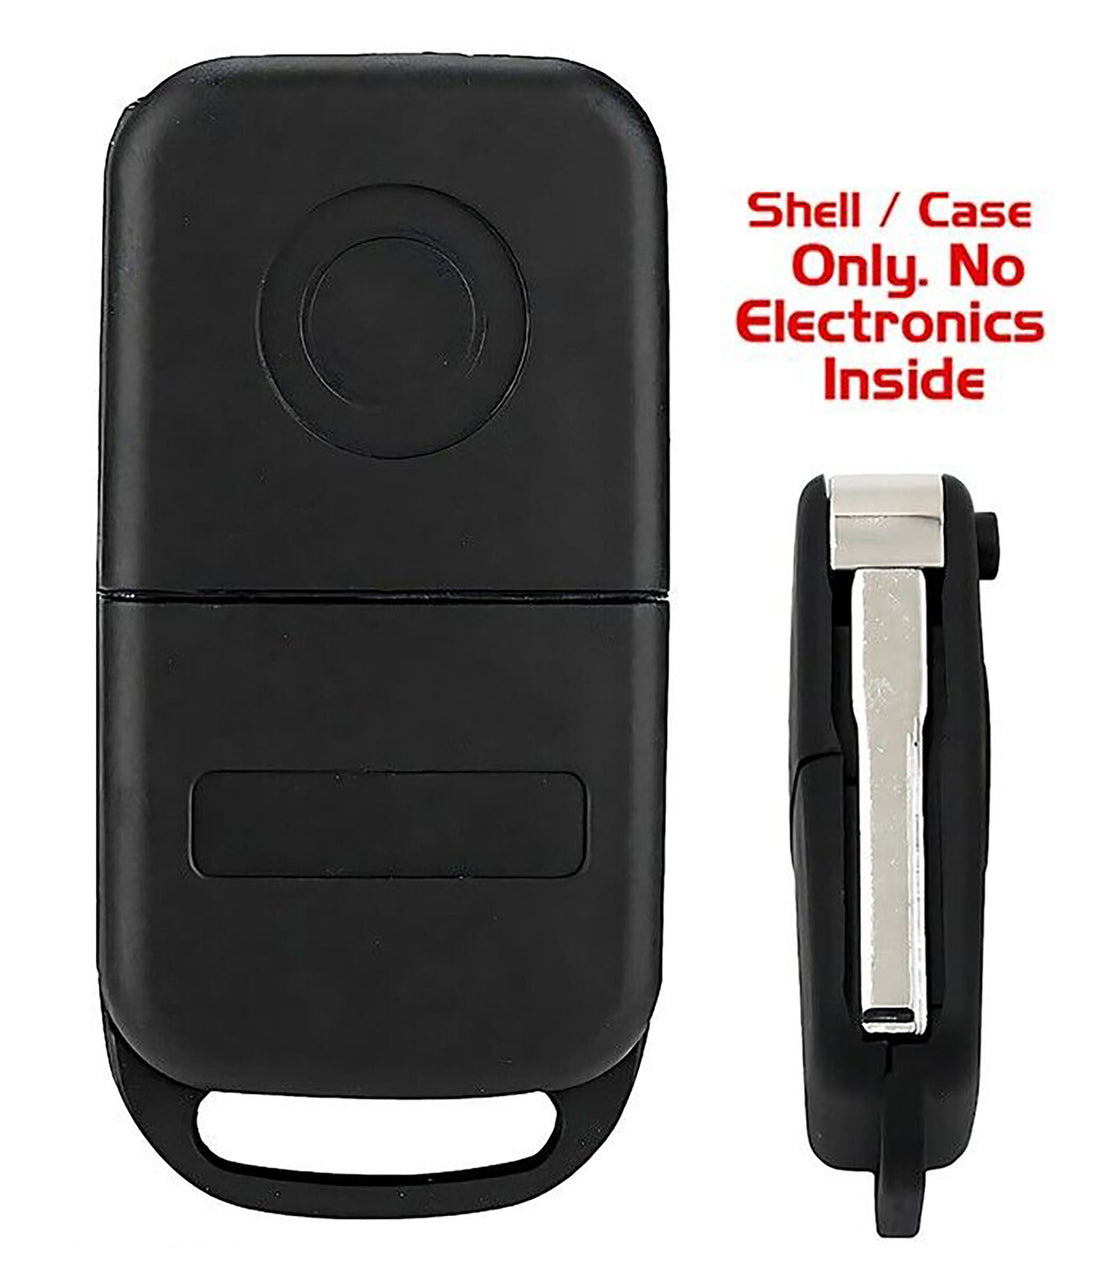 1x New Replacement Remote Key Fob SHELL / CASE Compatible with & Fit For 2004-2007 Mercedes Dodge Van - MPN MYT3X7259-02 (NO electronics or Chip inside)